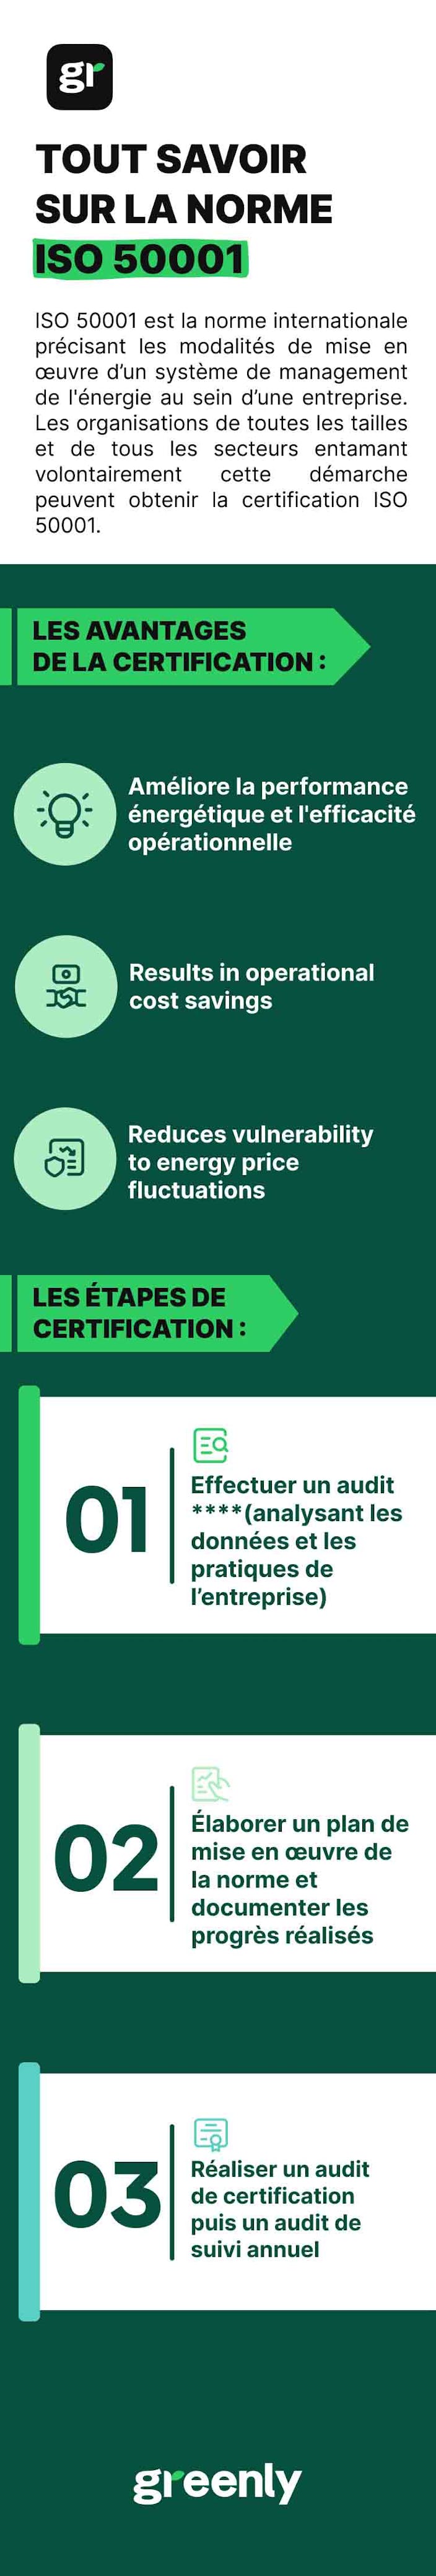 infographie mobile ISO 50001